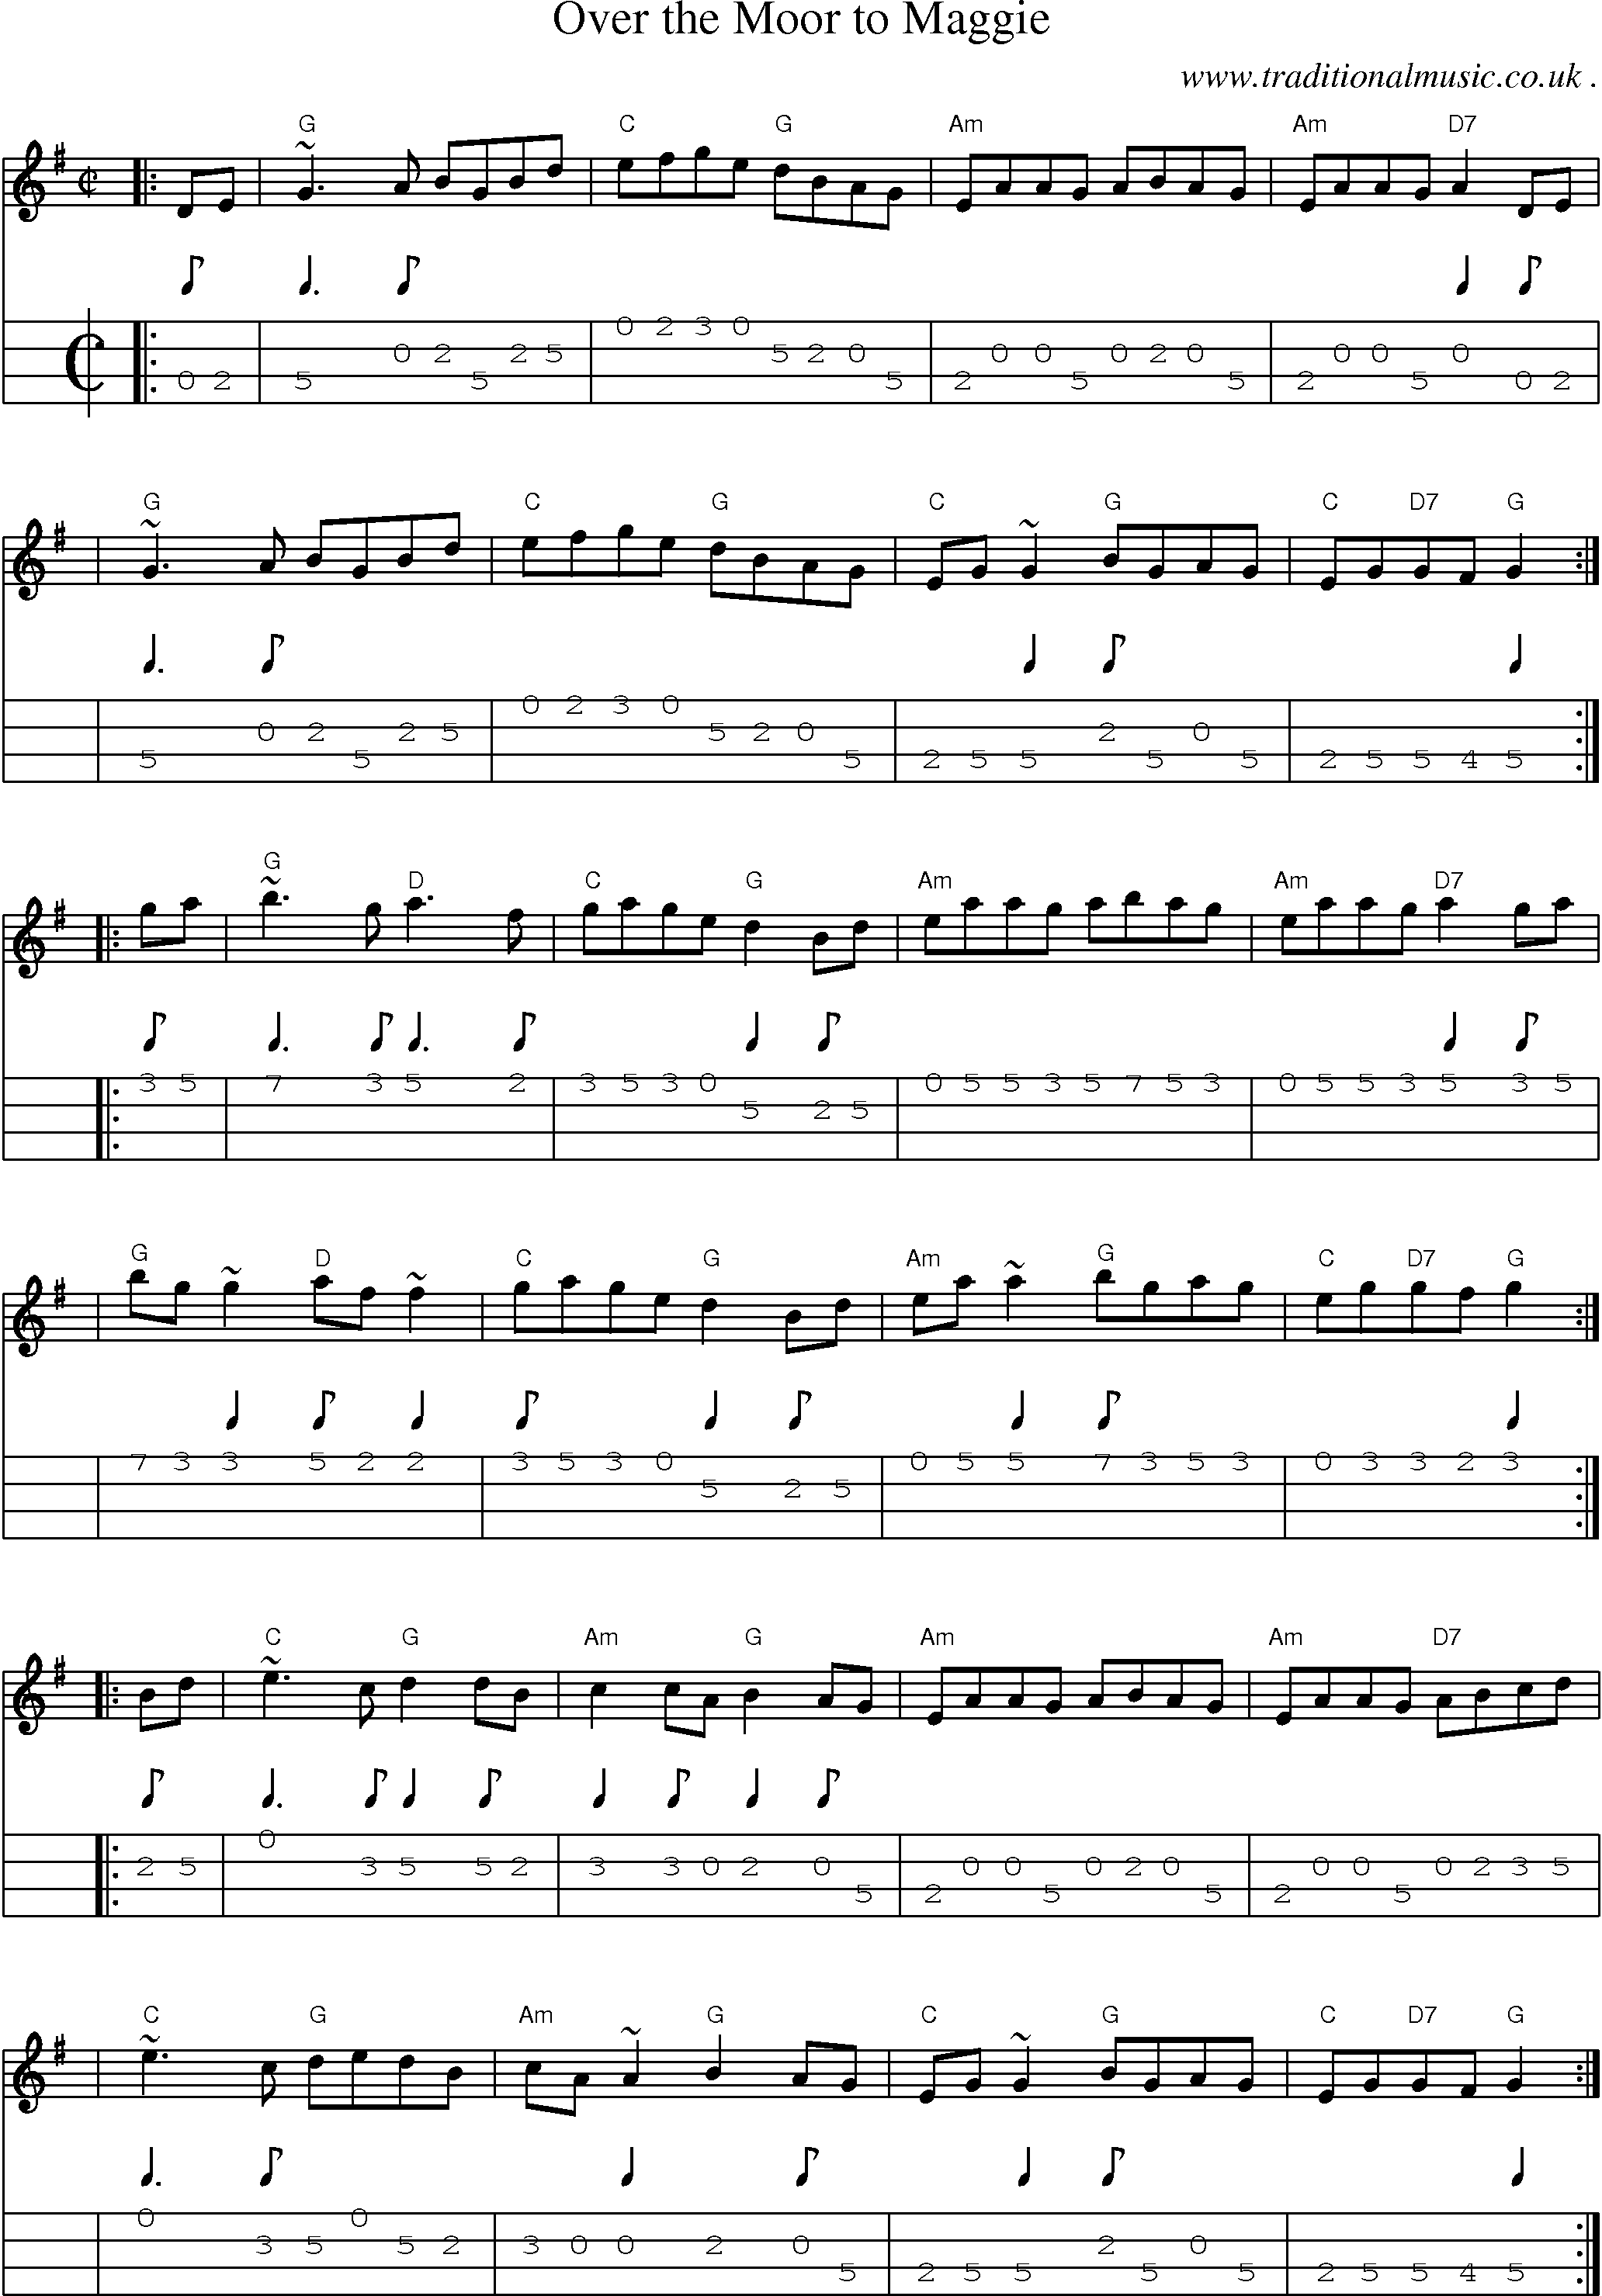 Sheet-music  score, Chords and Mandolin Tabs for Over The Moor To Maggie